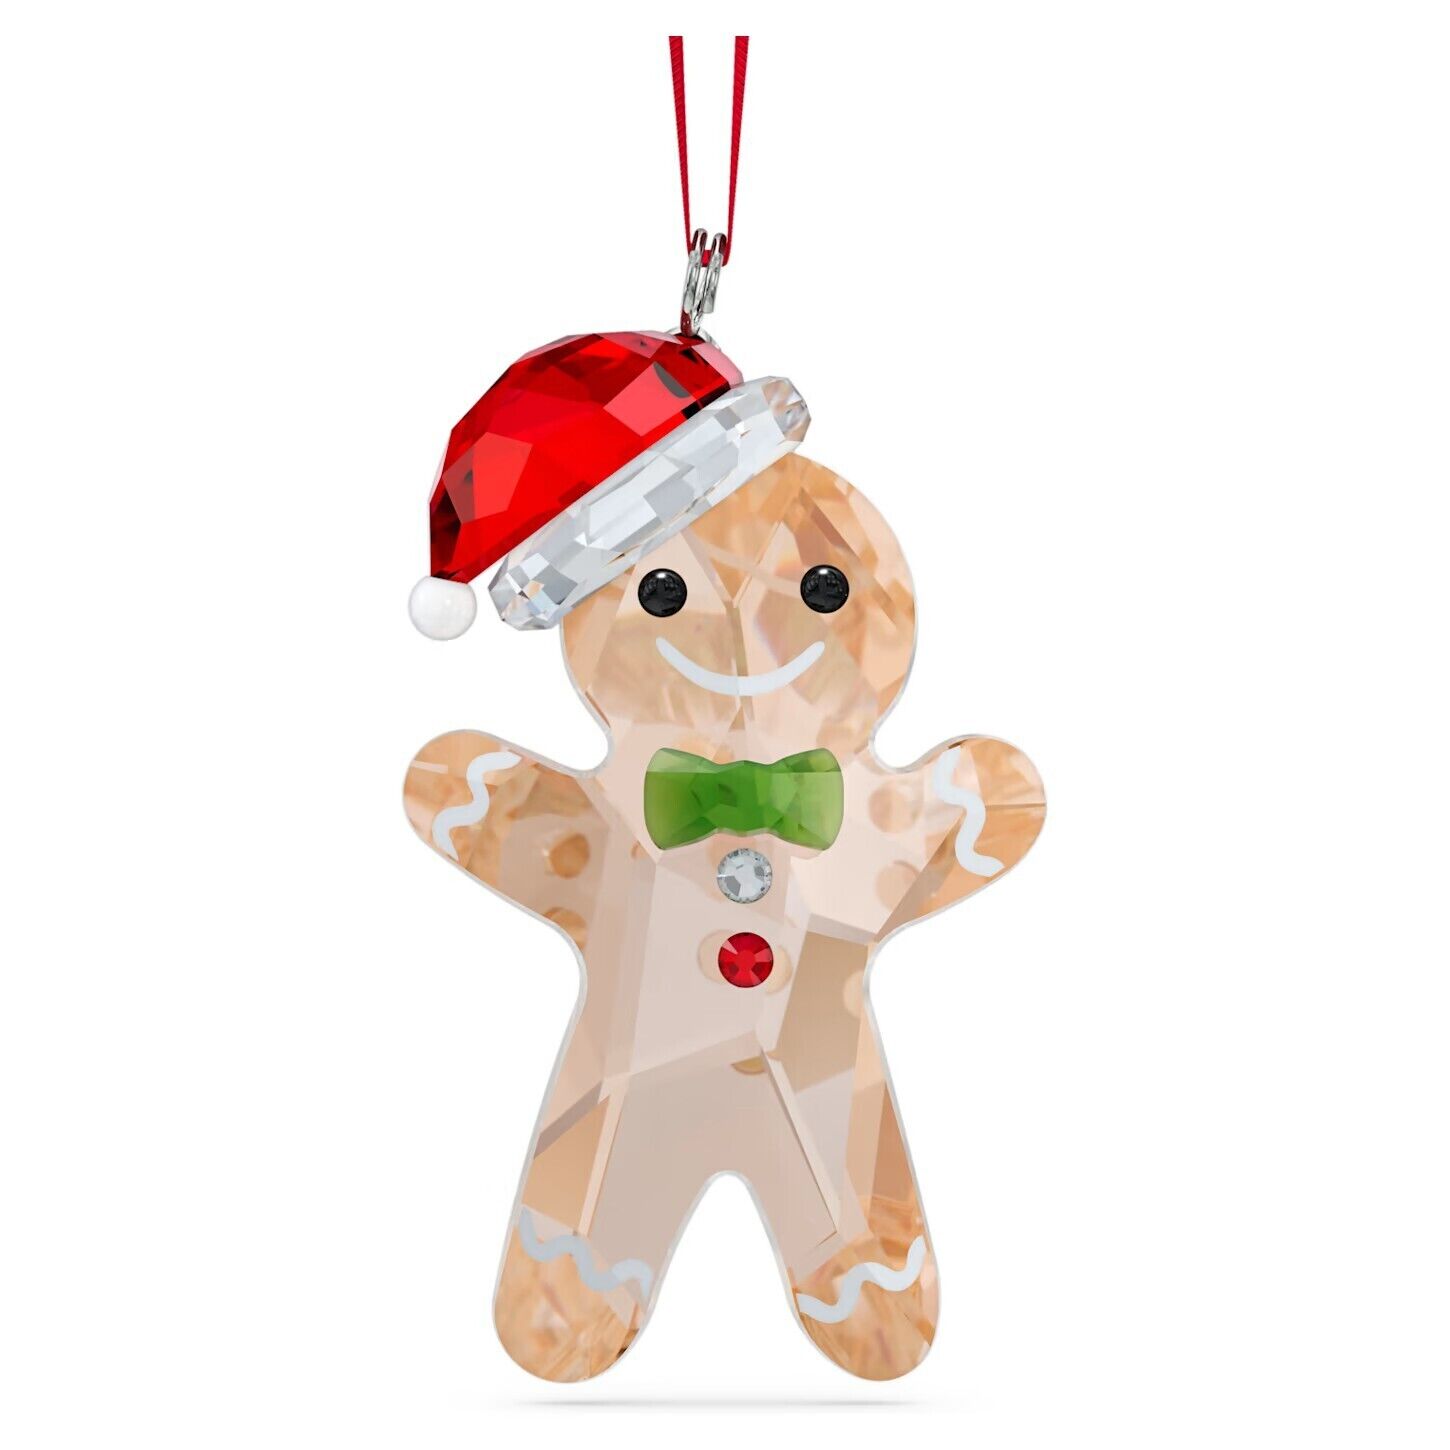 Swarovski Crystal Holiday Cheers Gingerbread Man Ornament, Multicolored, 5627607